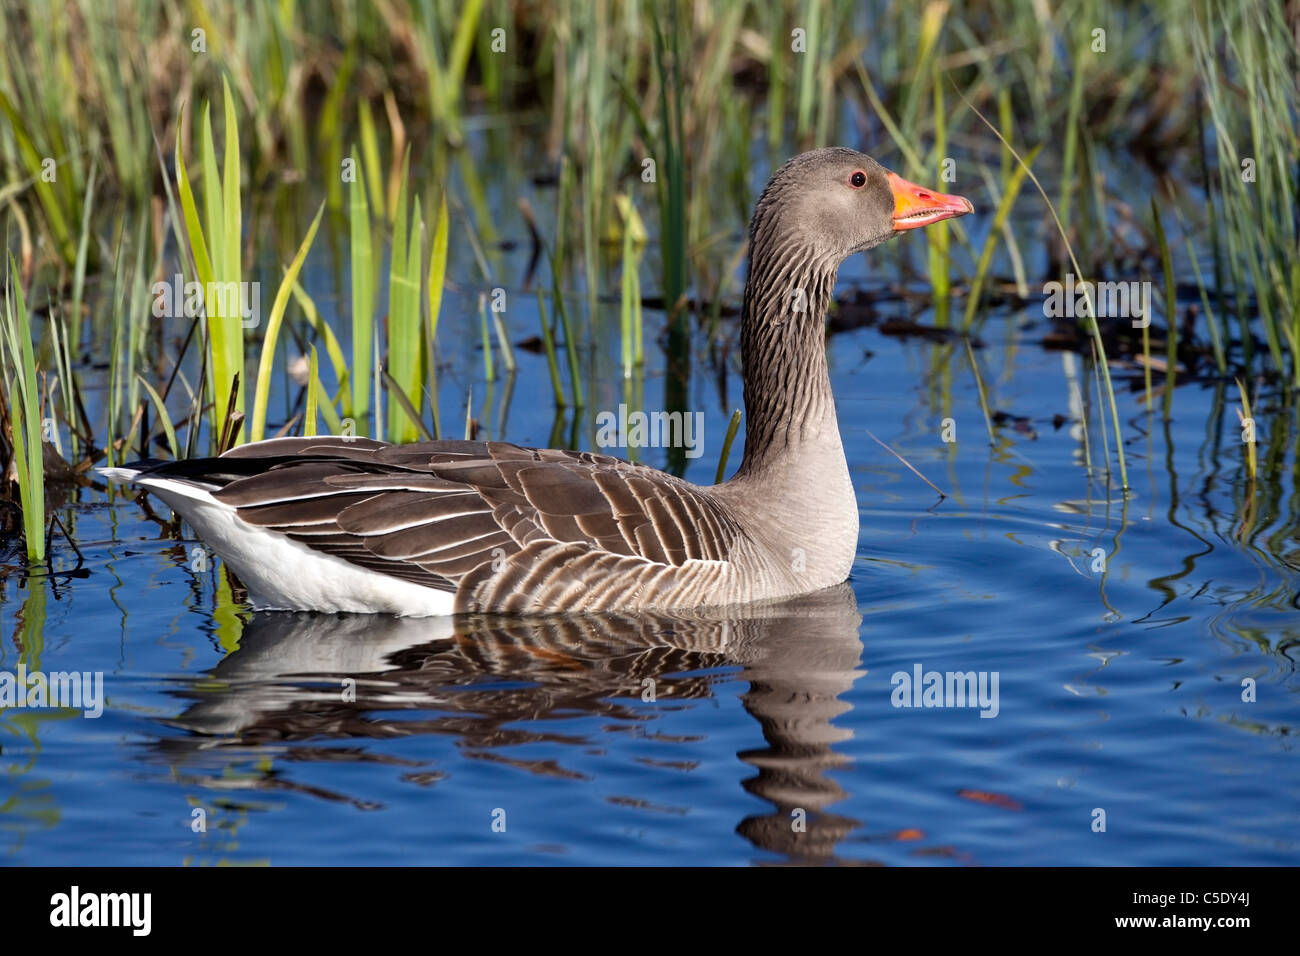 Side shot of a Greylag Goose with reflection by reeds in water Stock Photo